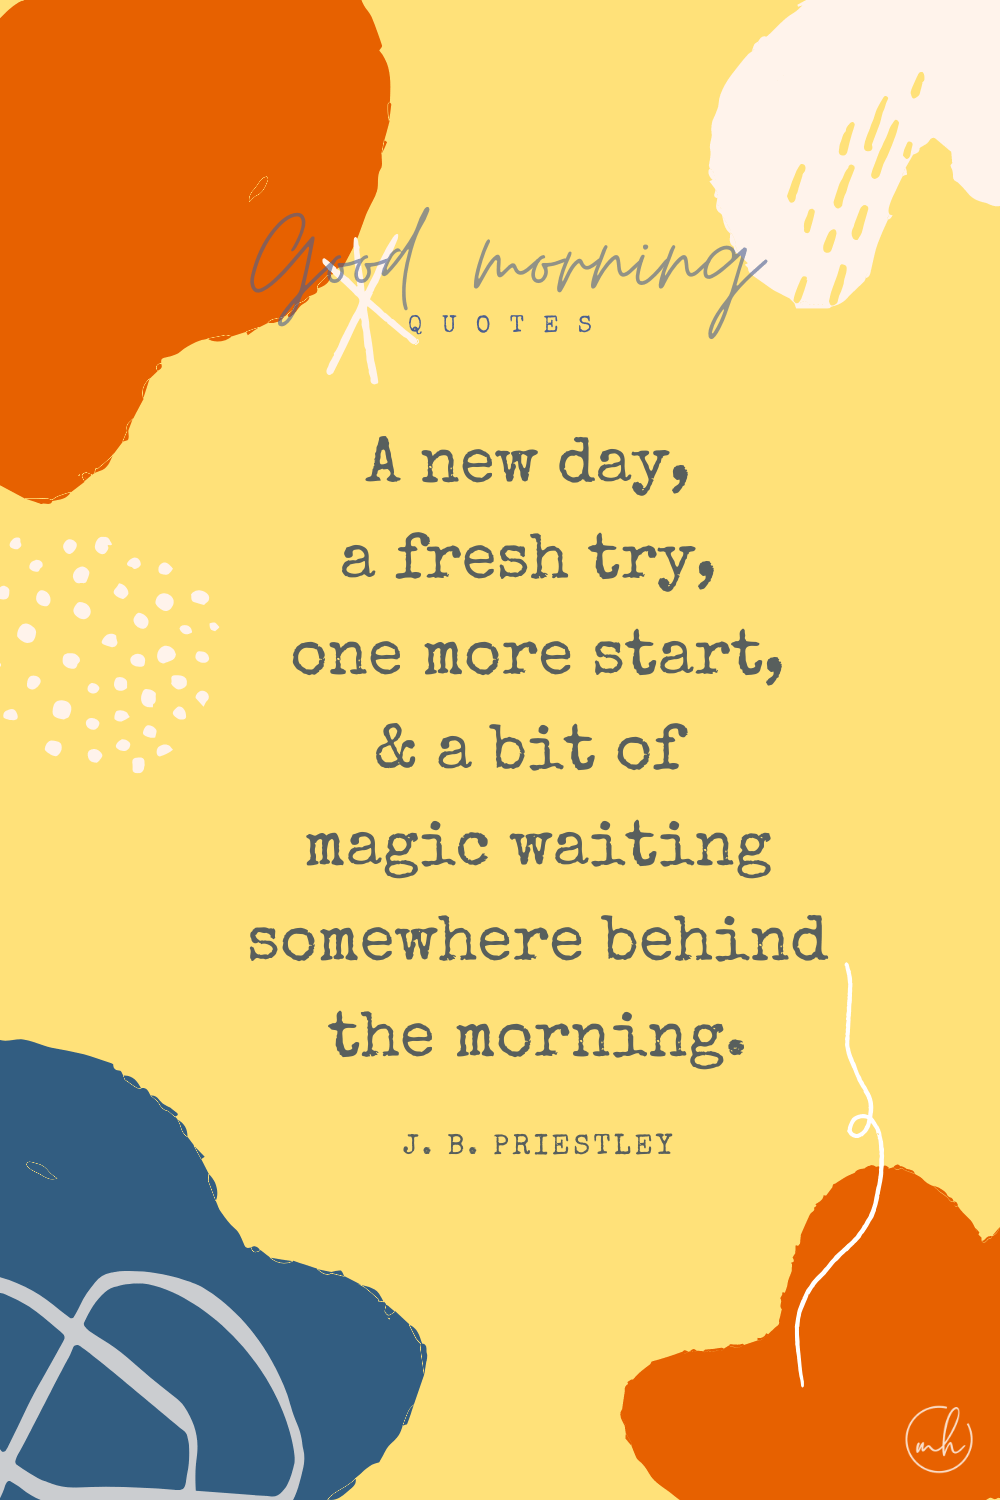 "I have always been delighted at the prospect of a new day, a fresh try, one more start, with perhaps a bit of magic waiting somewhere behind the morning." – J. B. Priestley